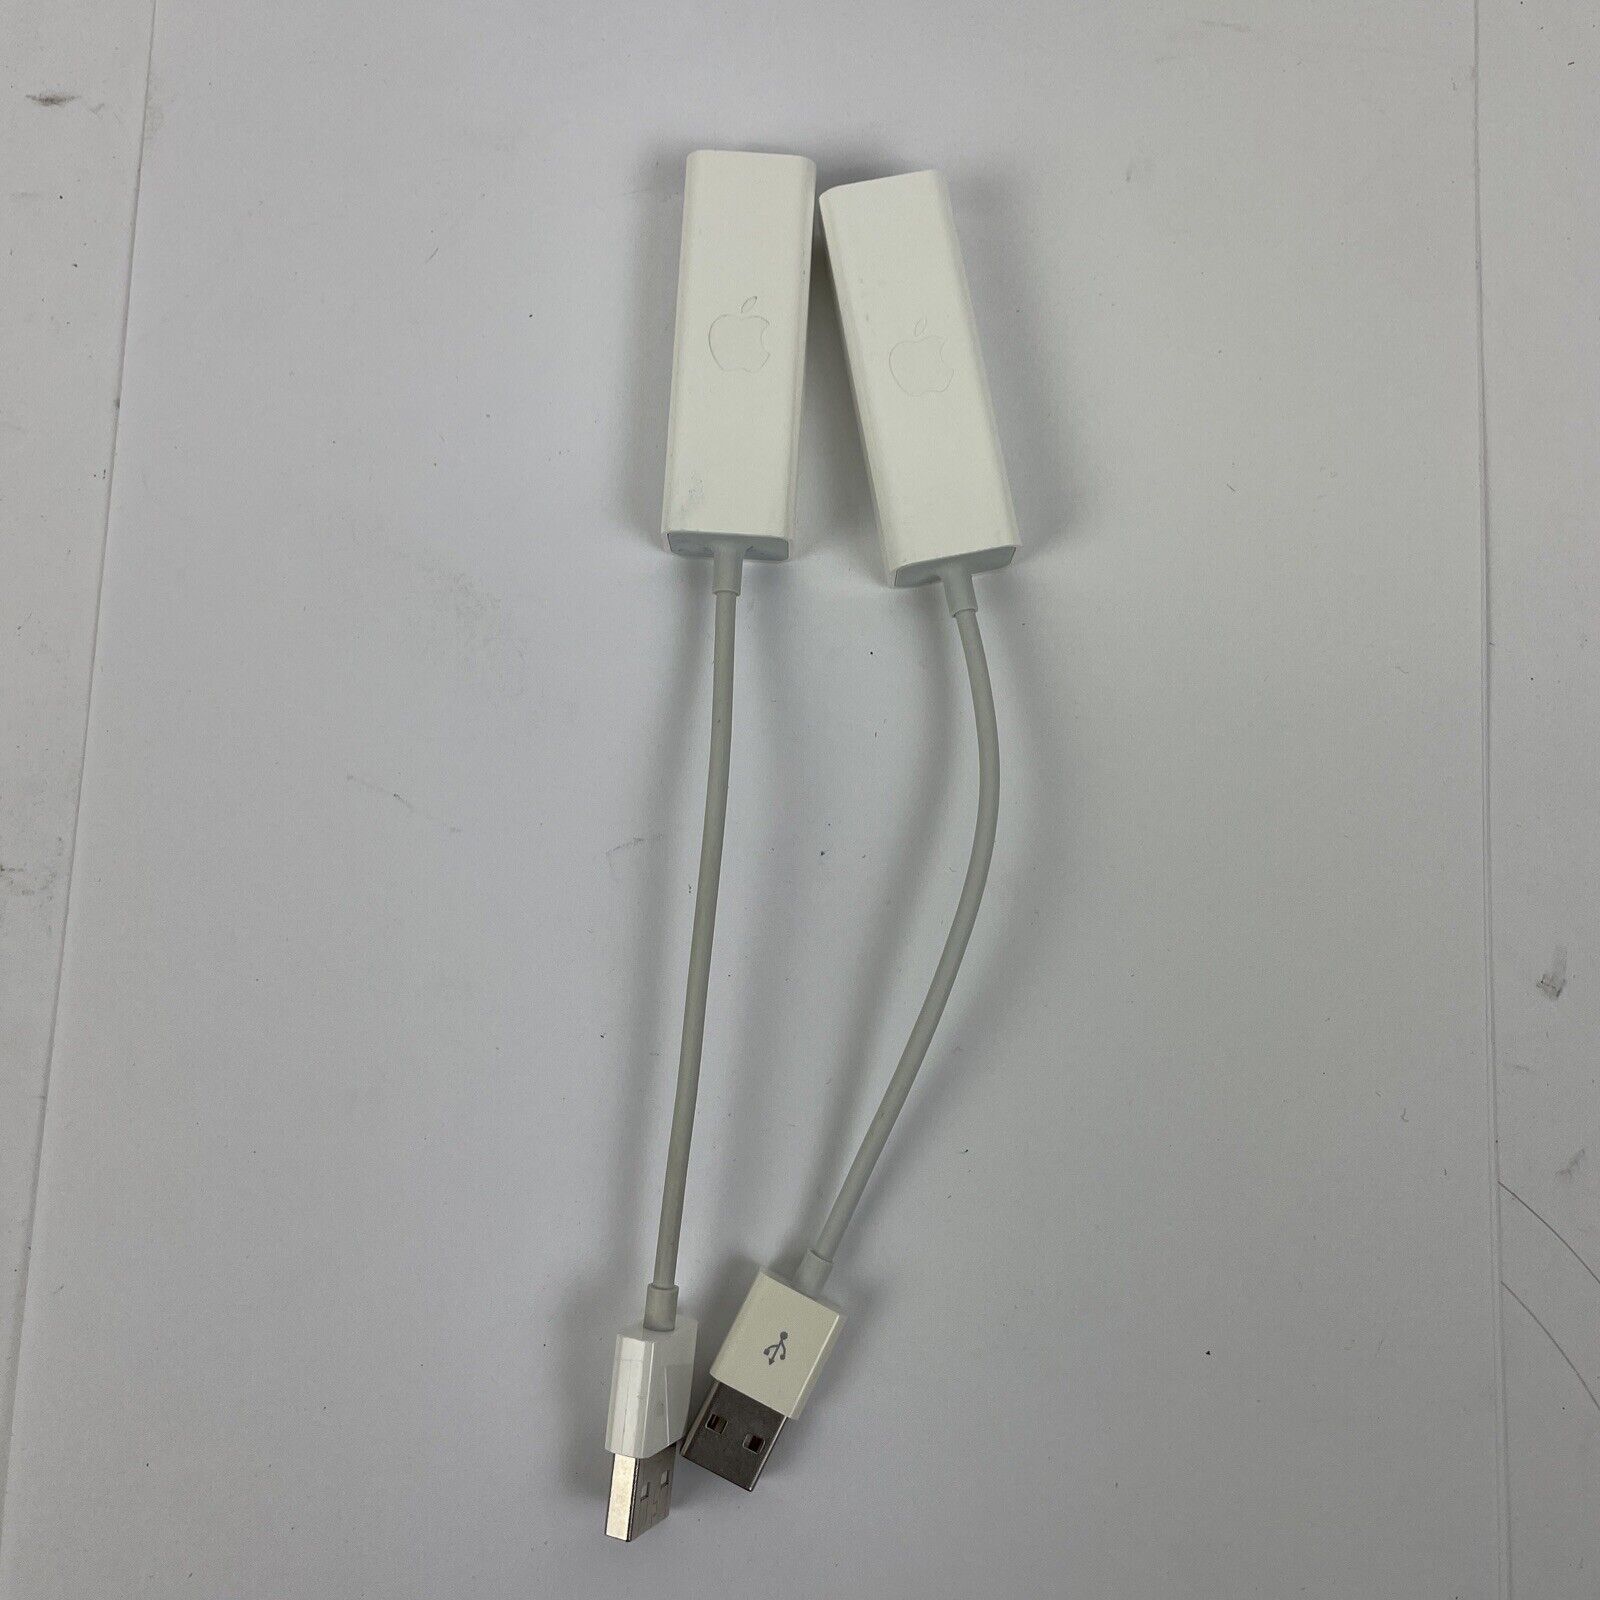 Lot 0f 2 x Genuine Apple - A1277 USB Ethernet Adapter for Apple Macbooks - VGC